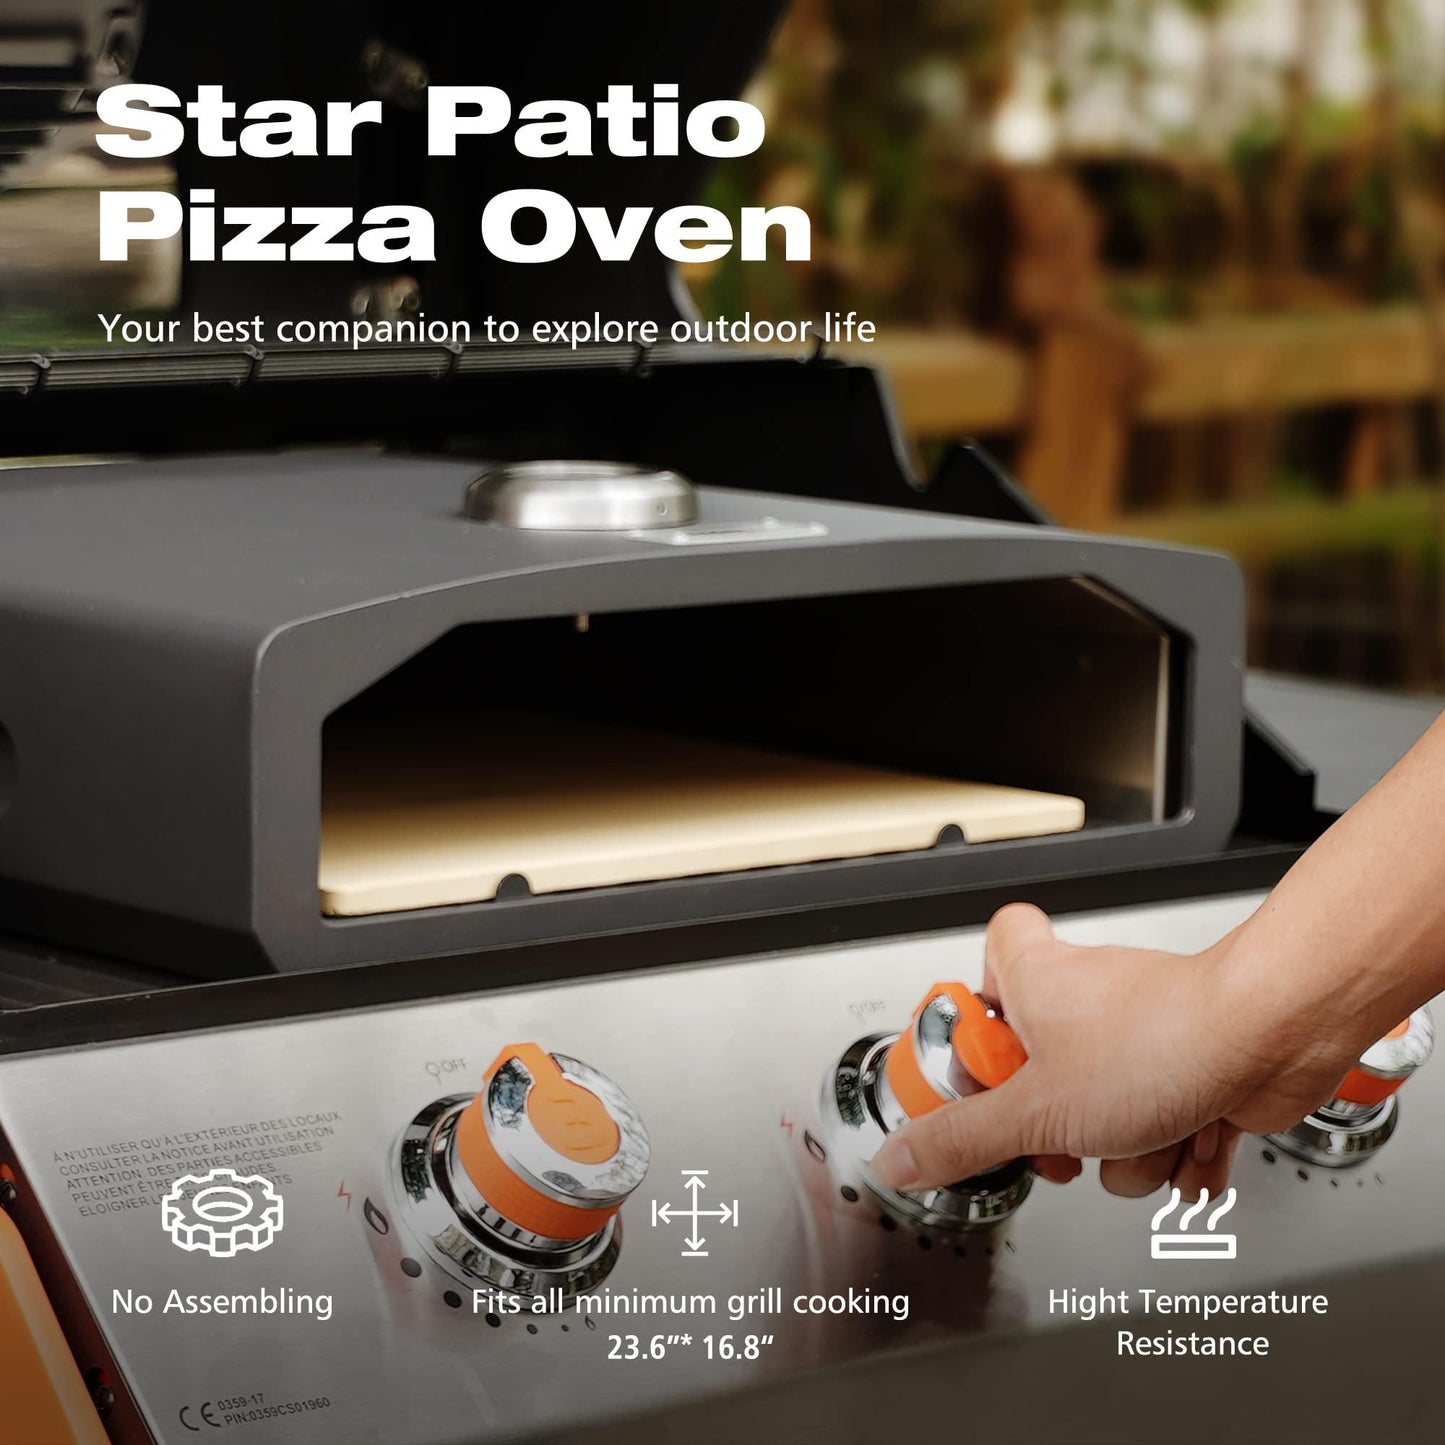 STAR PATIO Pizza Oven for Grill - Portable Grill Top Pizza Oven with Pizza Stone, Pizza Peel and Thermometer - Home Backyard Pizza Maker for Charcoal Grill, Gas Grill, PZB-002 - CookCave